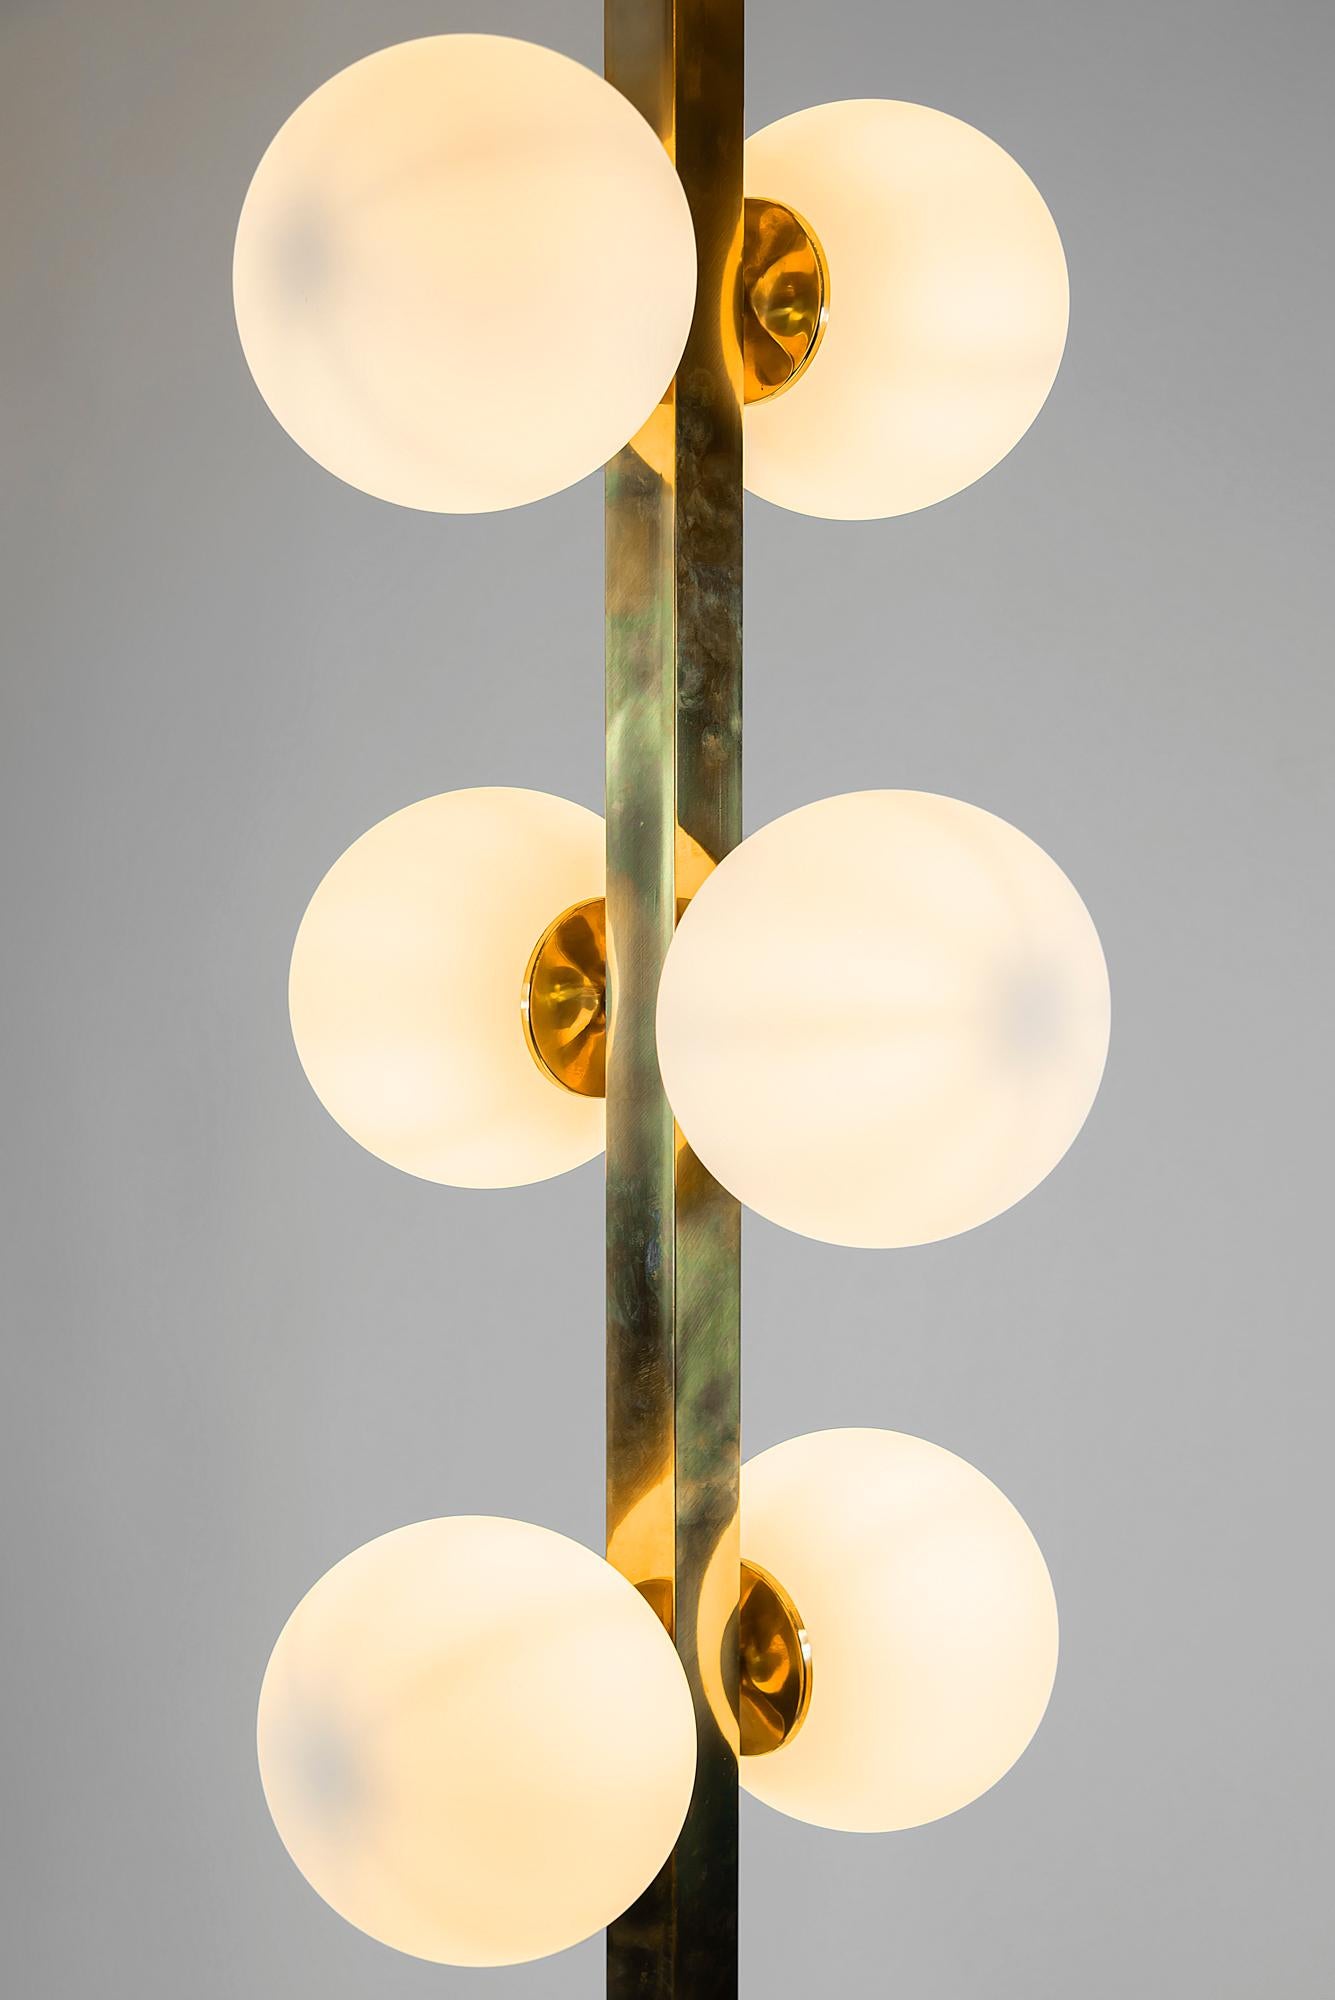 Italian midcentury design floor lamp is made of rectangular satin finish brass stand on 4 branch leg. It goes with 10 lamps including bulbs E27. The glass shades are white color matte finish.
Measurements: 37 x 37 x 200 (H) cm, legs 59 x 59 cm,